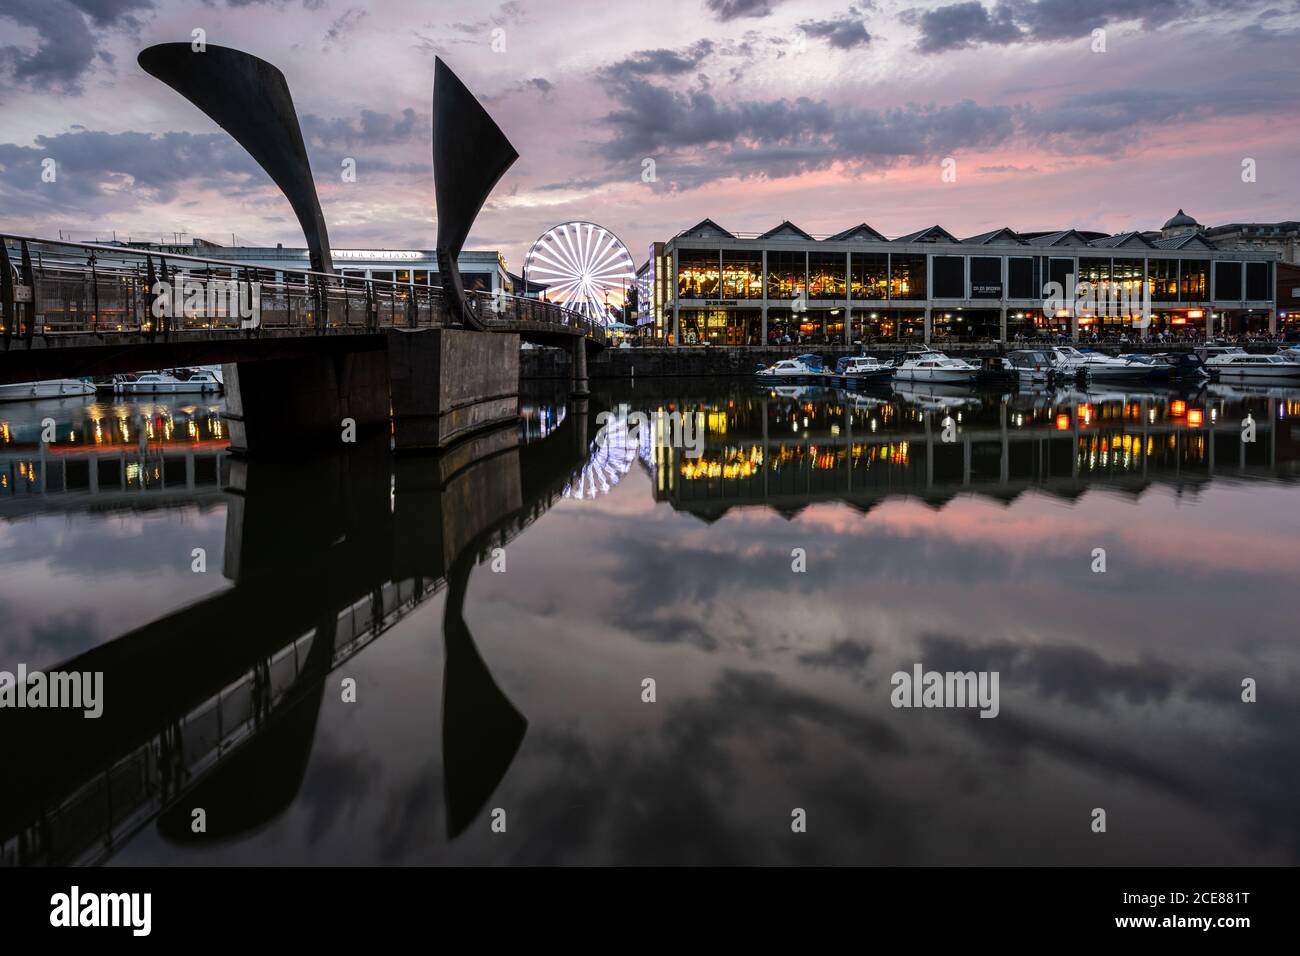 Sunset lights up the sky above Pero's Bridge and Anchor Square on Bristol's regenerated post-industrial Harbourside. Stock Photo